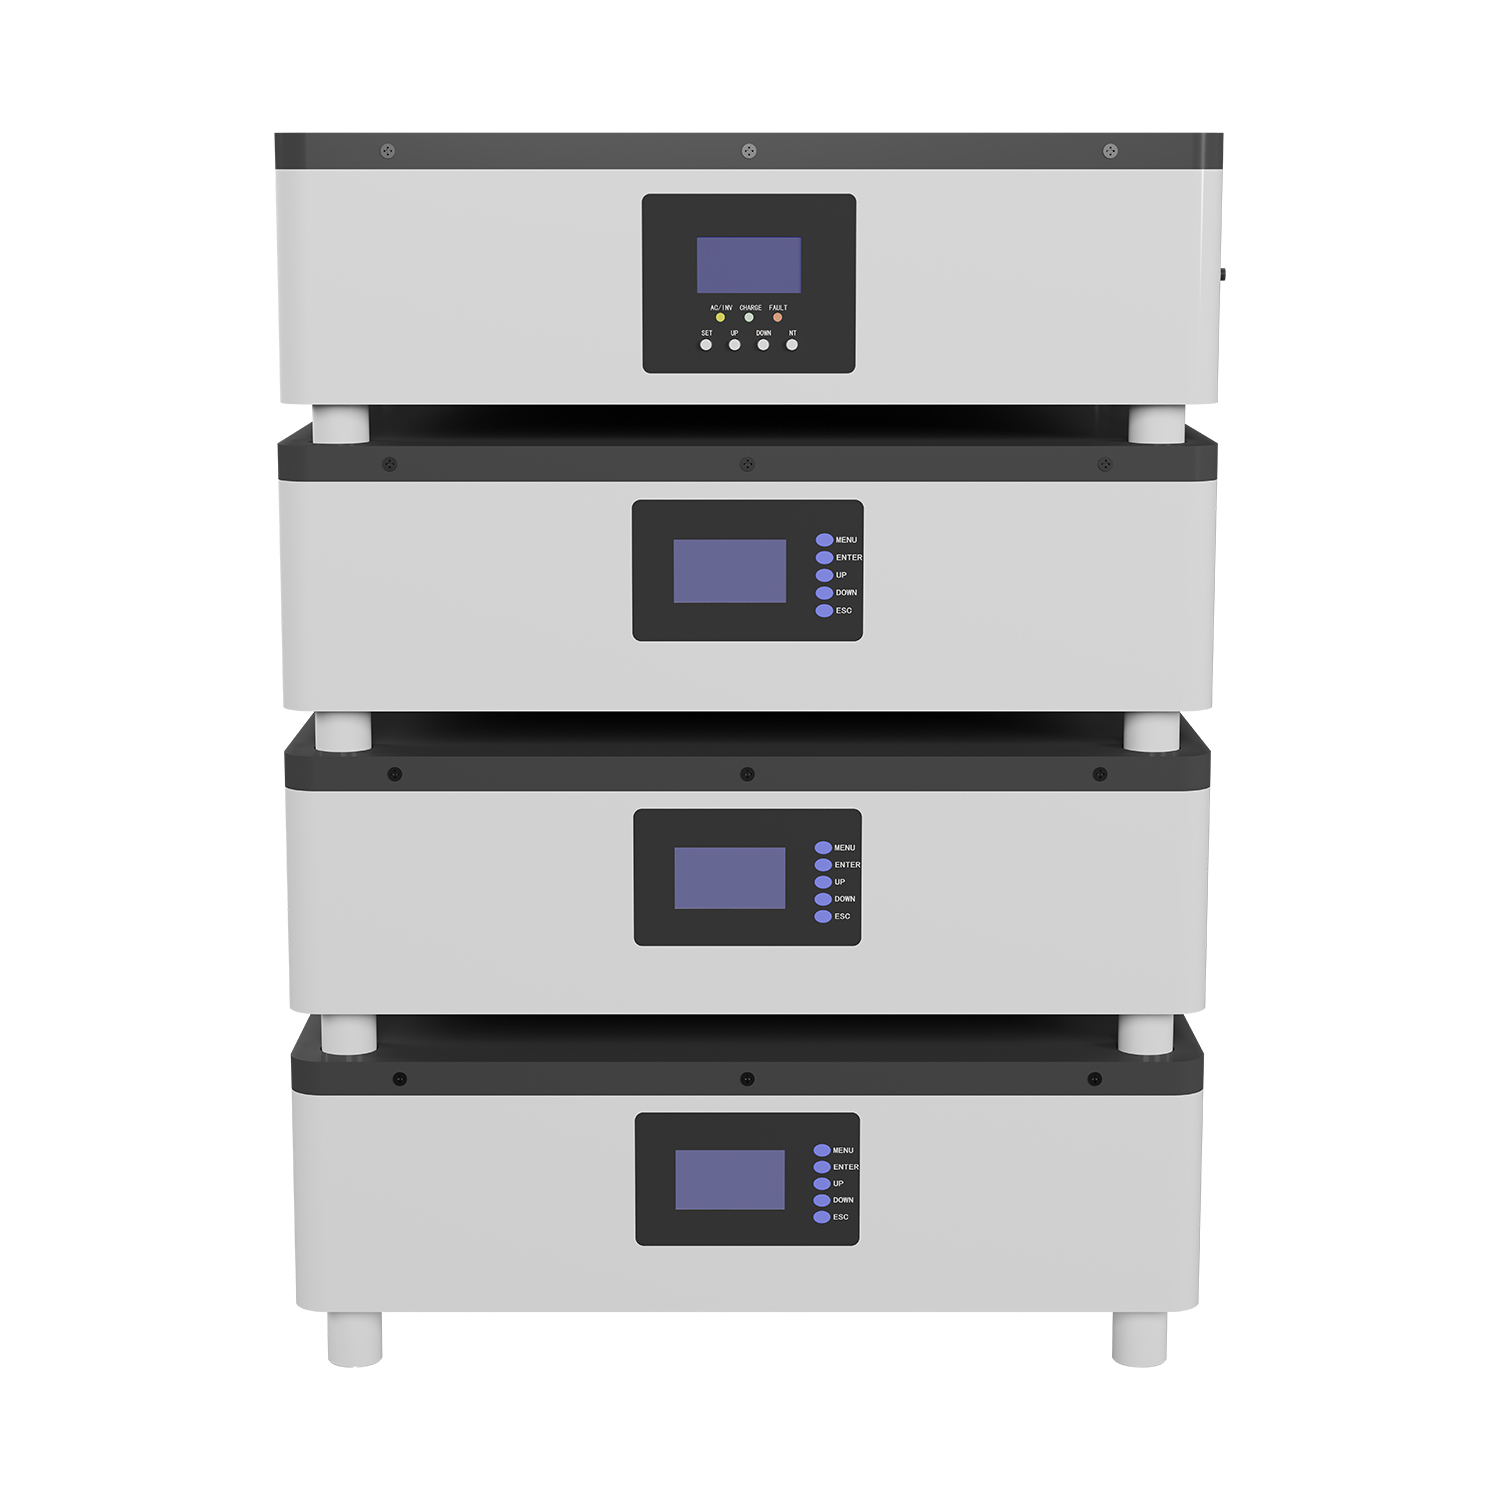 Lithium Ion Battery Backup System - Home Power Backups